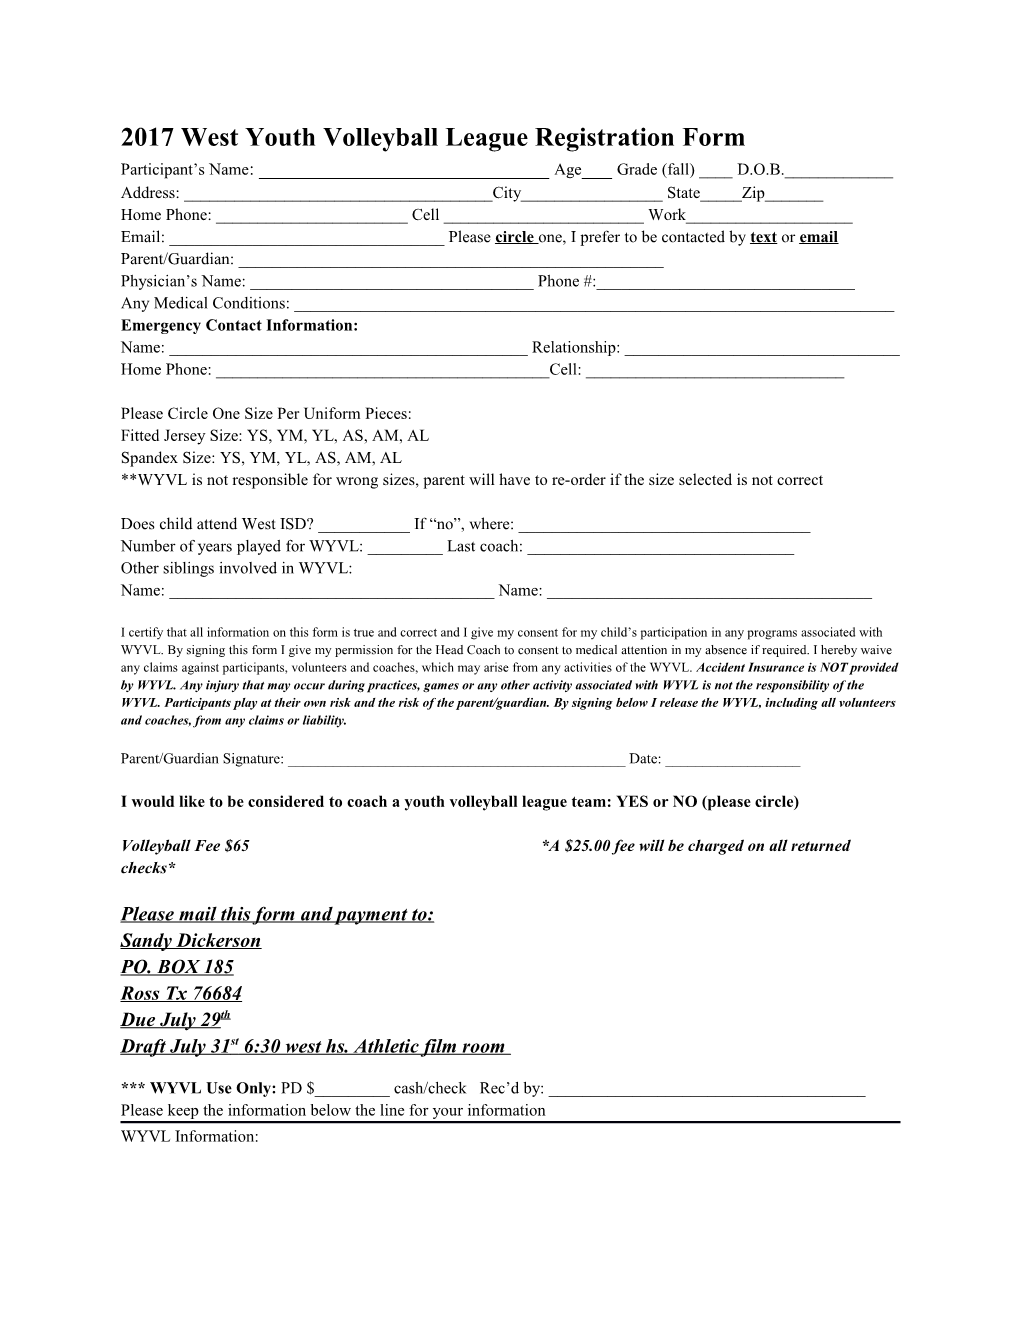 2017 West Youth Volleyball League Registration Form